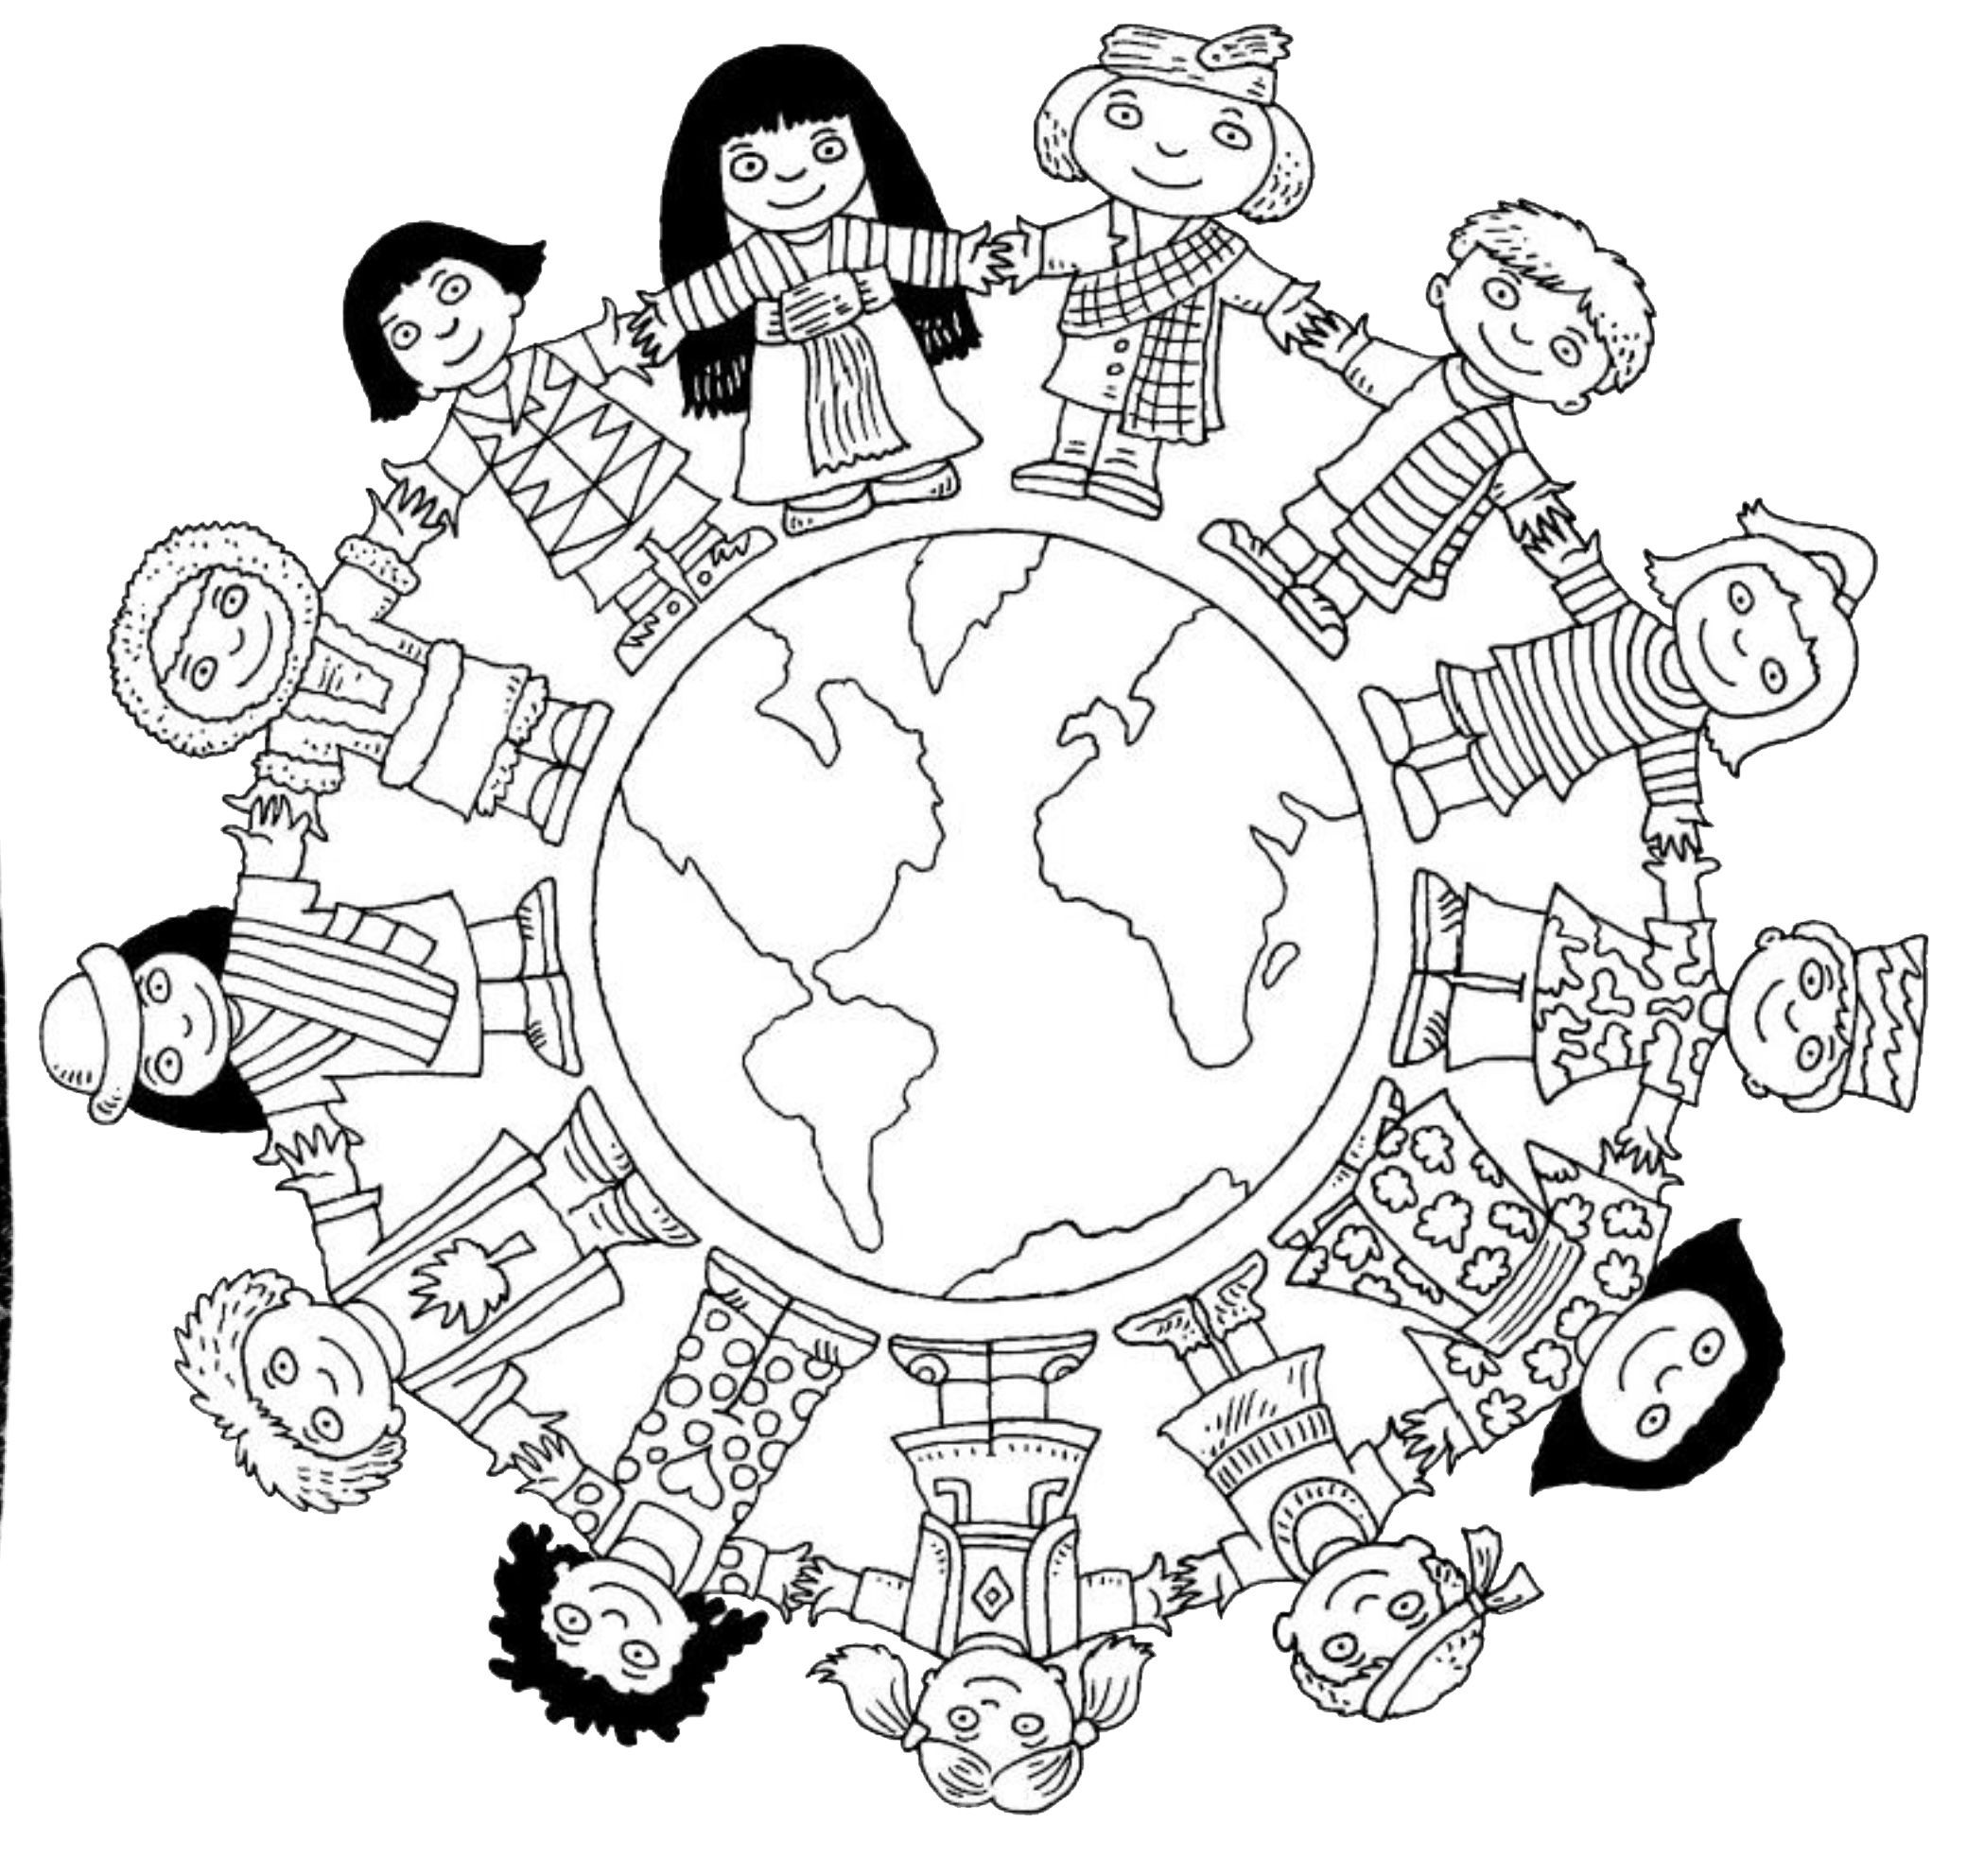 Children Of The World Coloring Pages
 Children Around The World Coloring Page